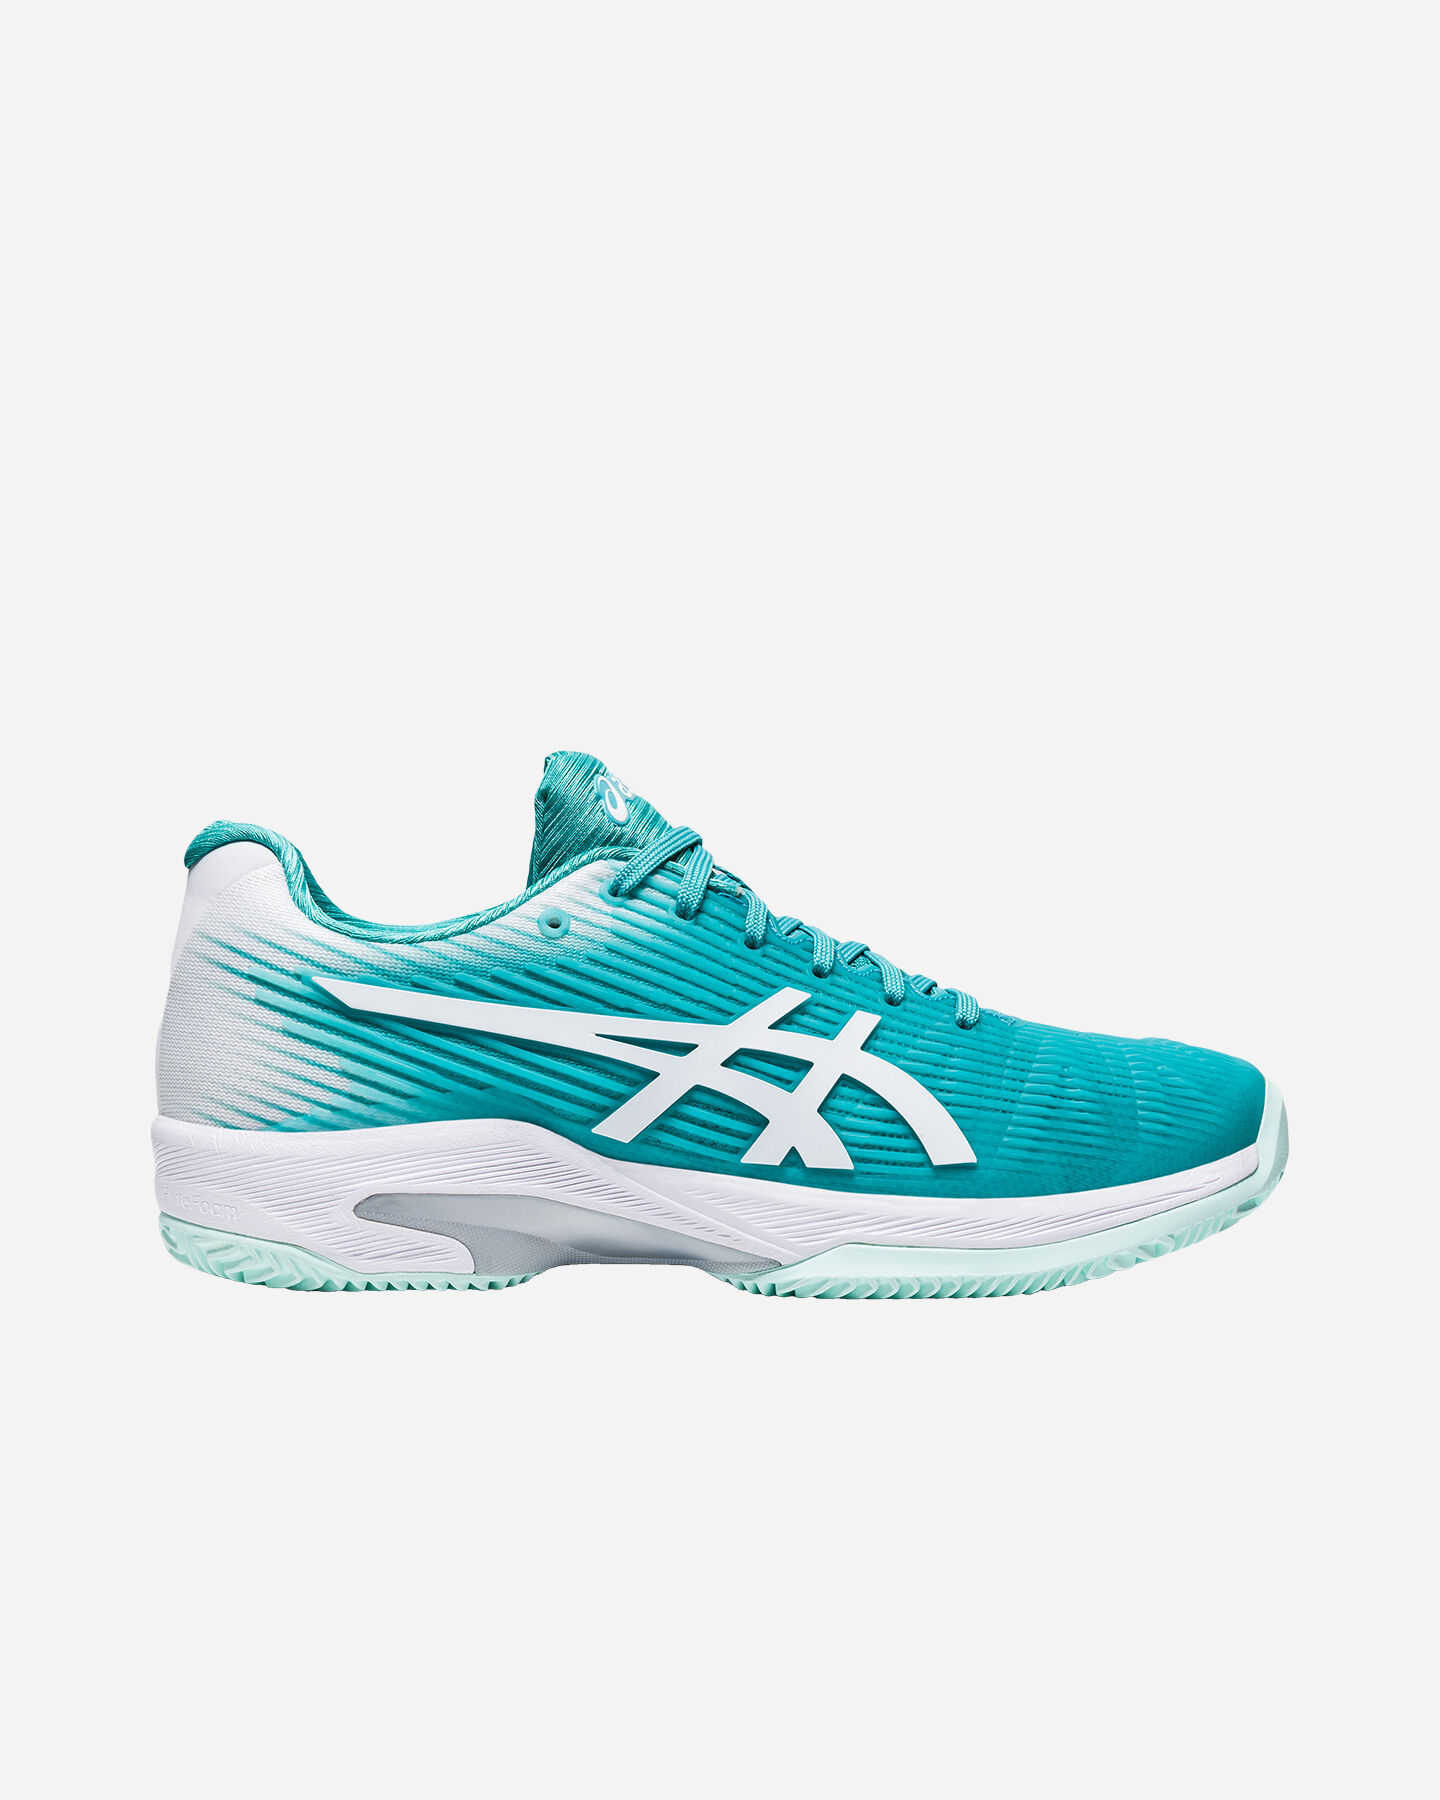  Scarpe tennis ASICS SOLUTION SPEED FF CLAY W S5213159|300|5 scatto 0